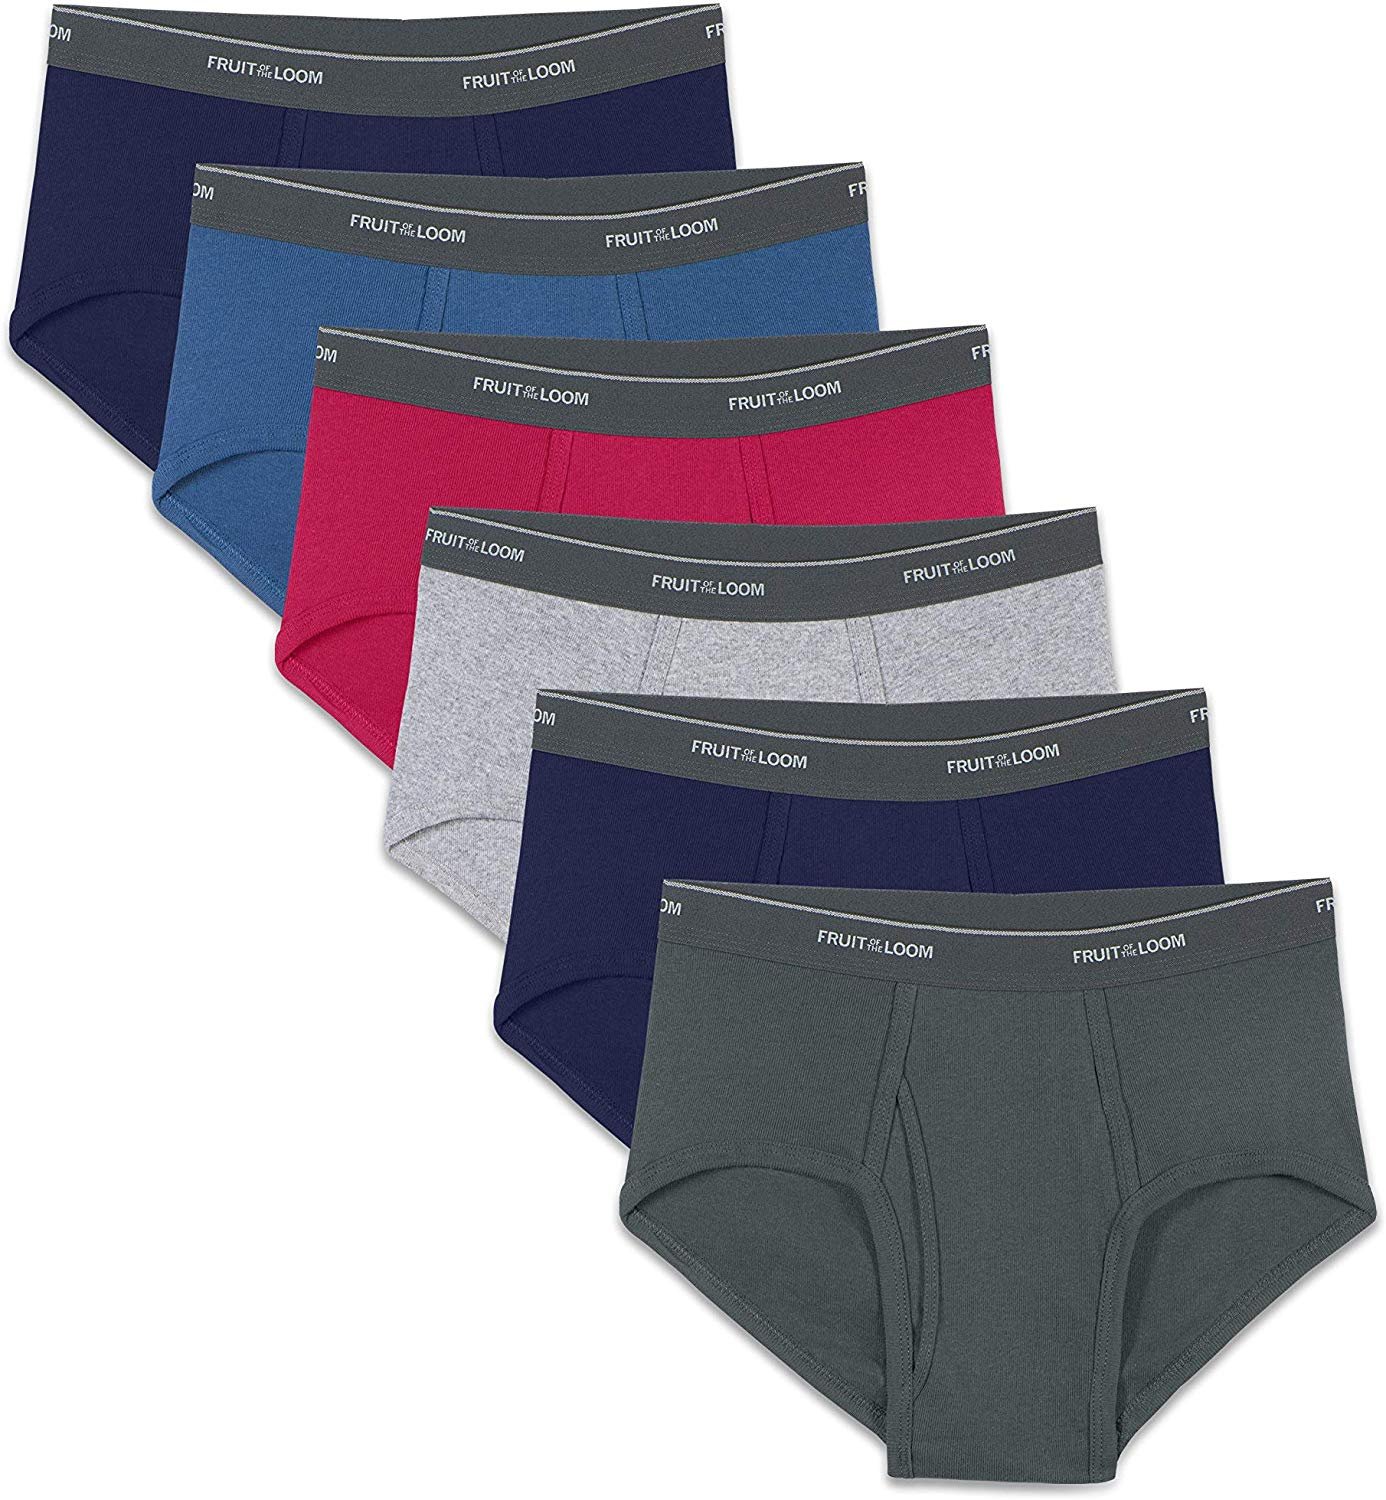 Fruit of the Loom Boys Underwear, 10 Pack Assorted Fashion Briefs, Sizes S- XL